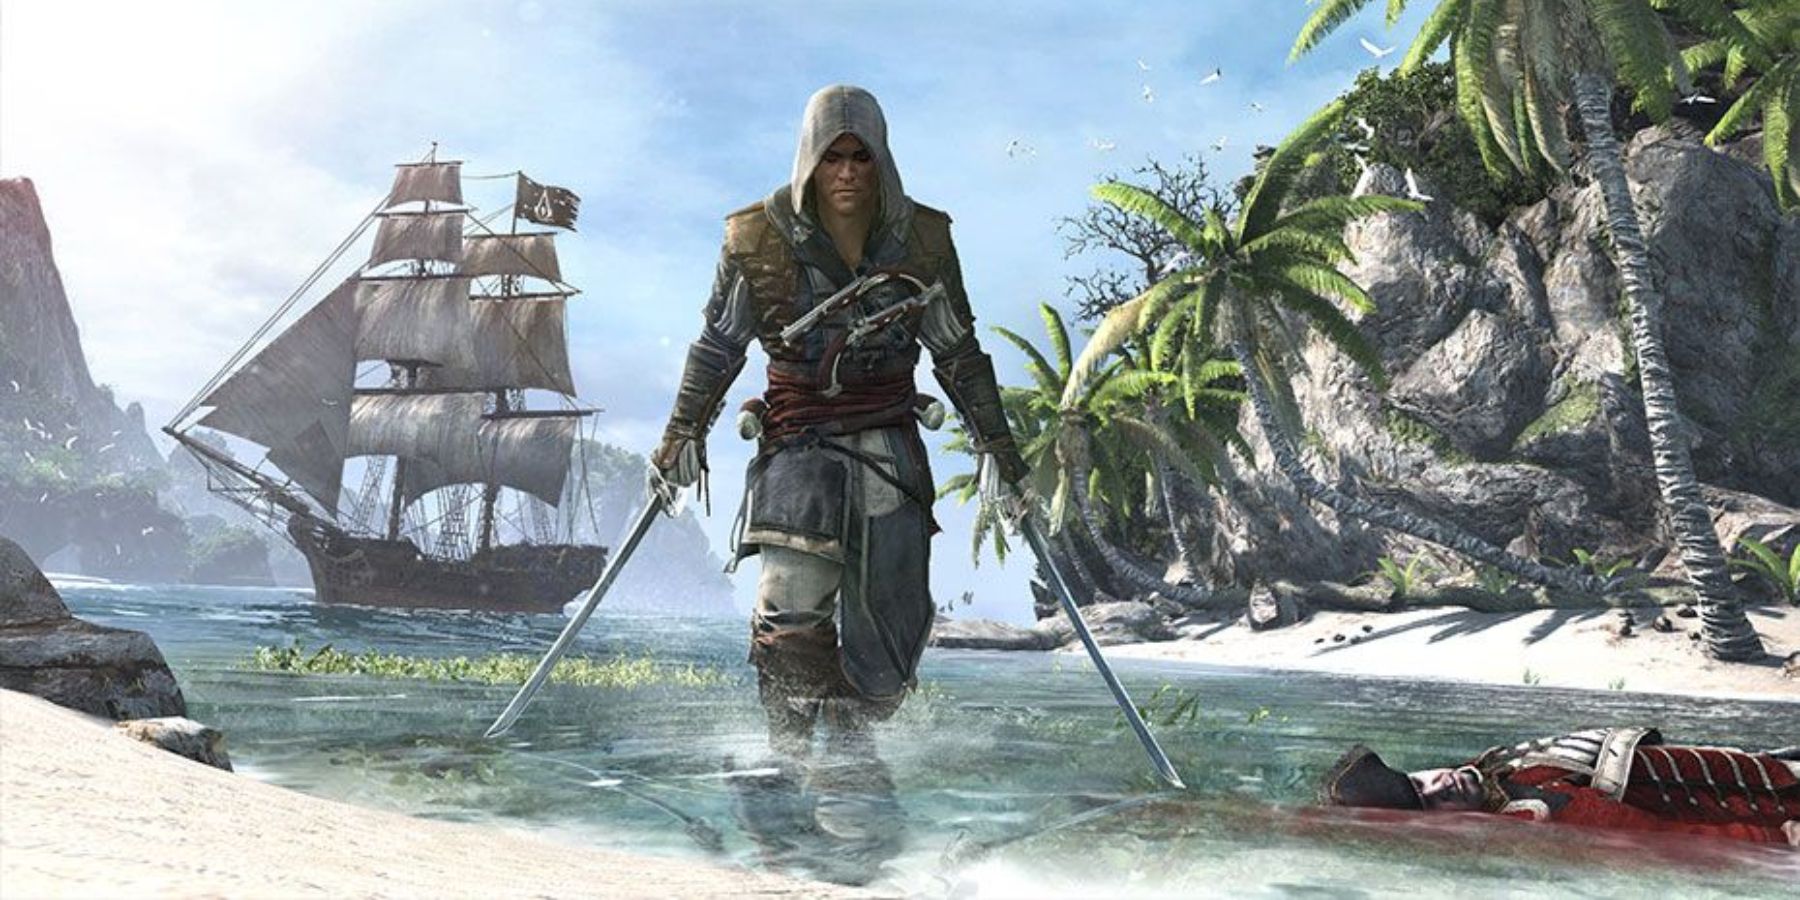 The main character and the ship in Assassin's Creed Black Flag